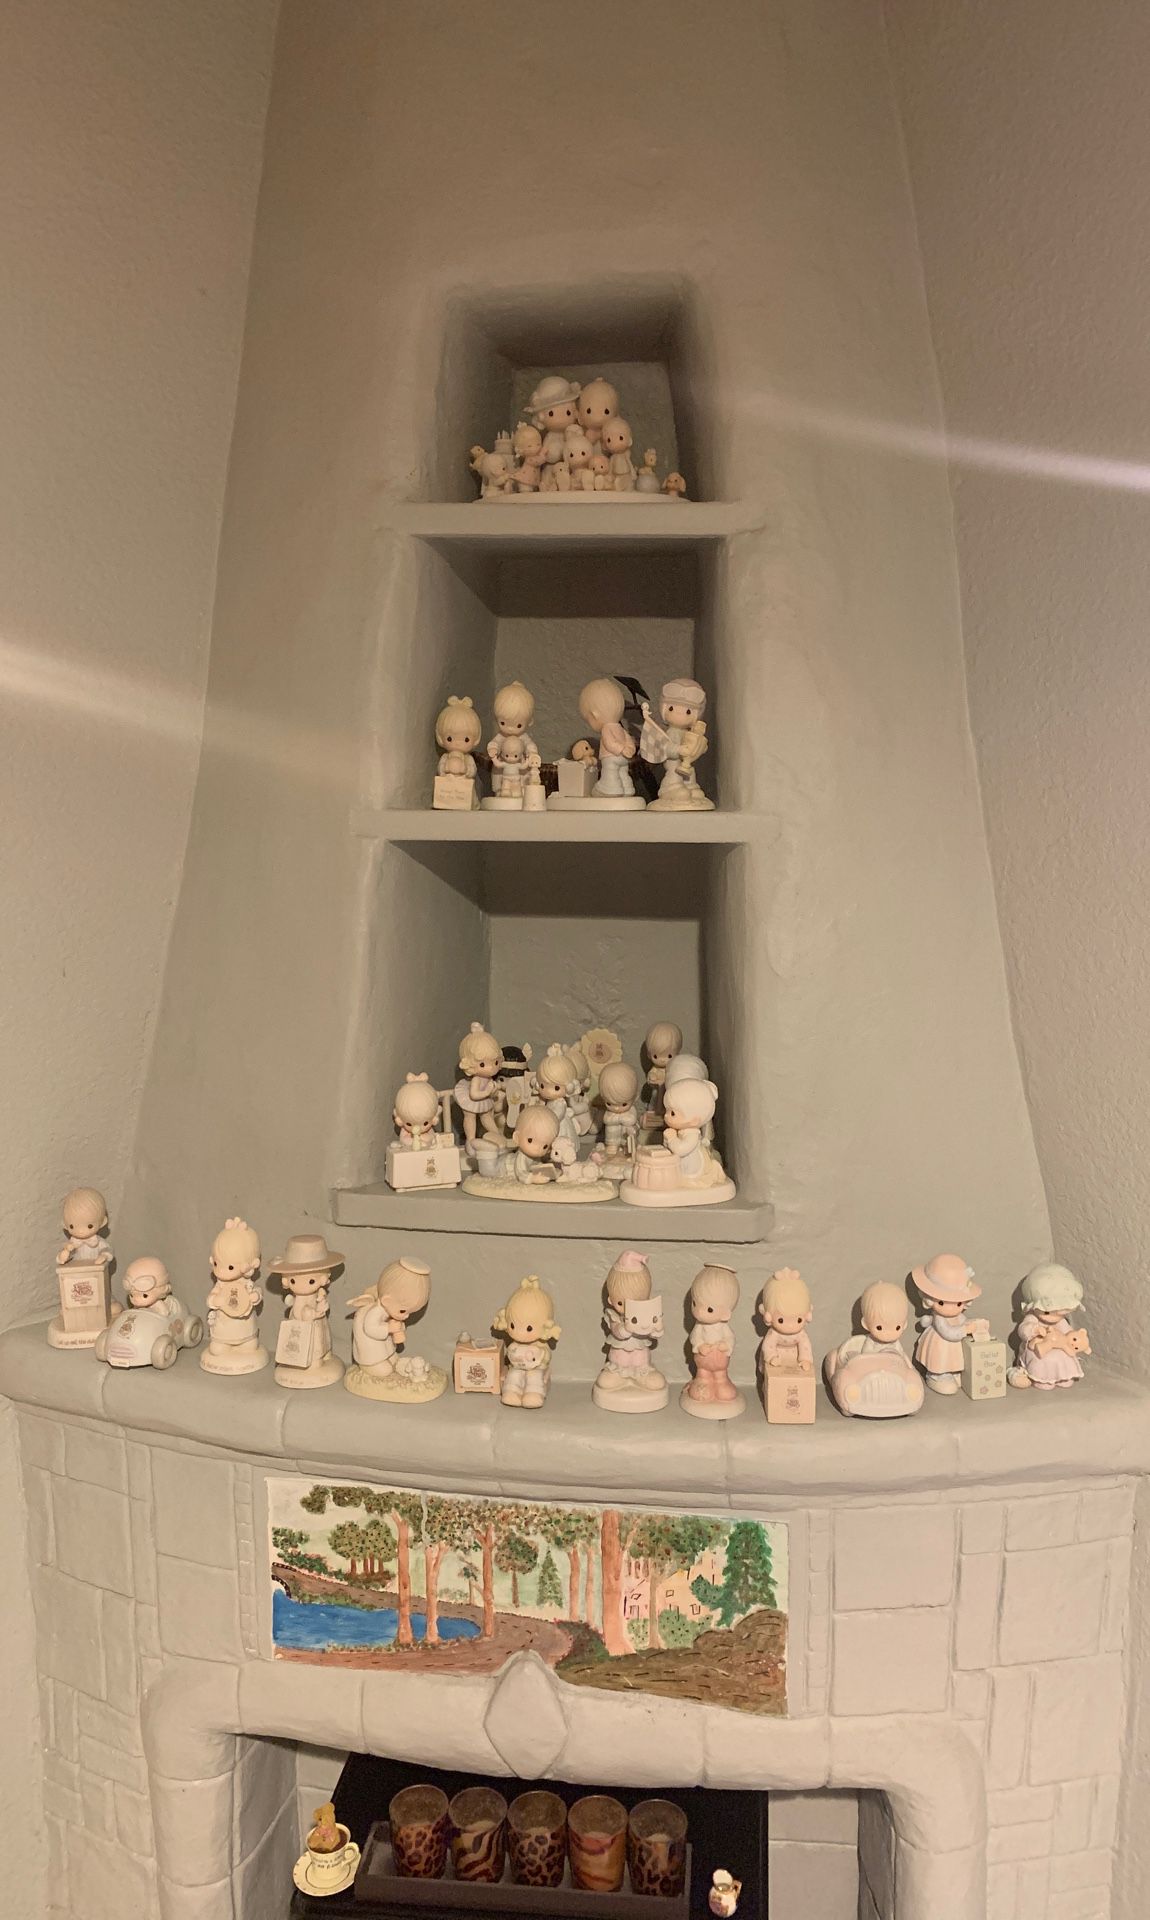 Collection of precious moments figurines 41 pieces send me offer